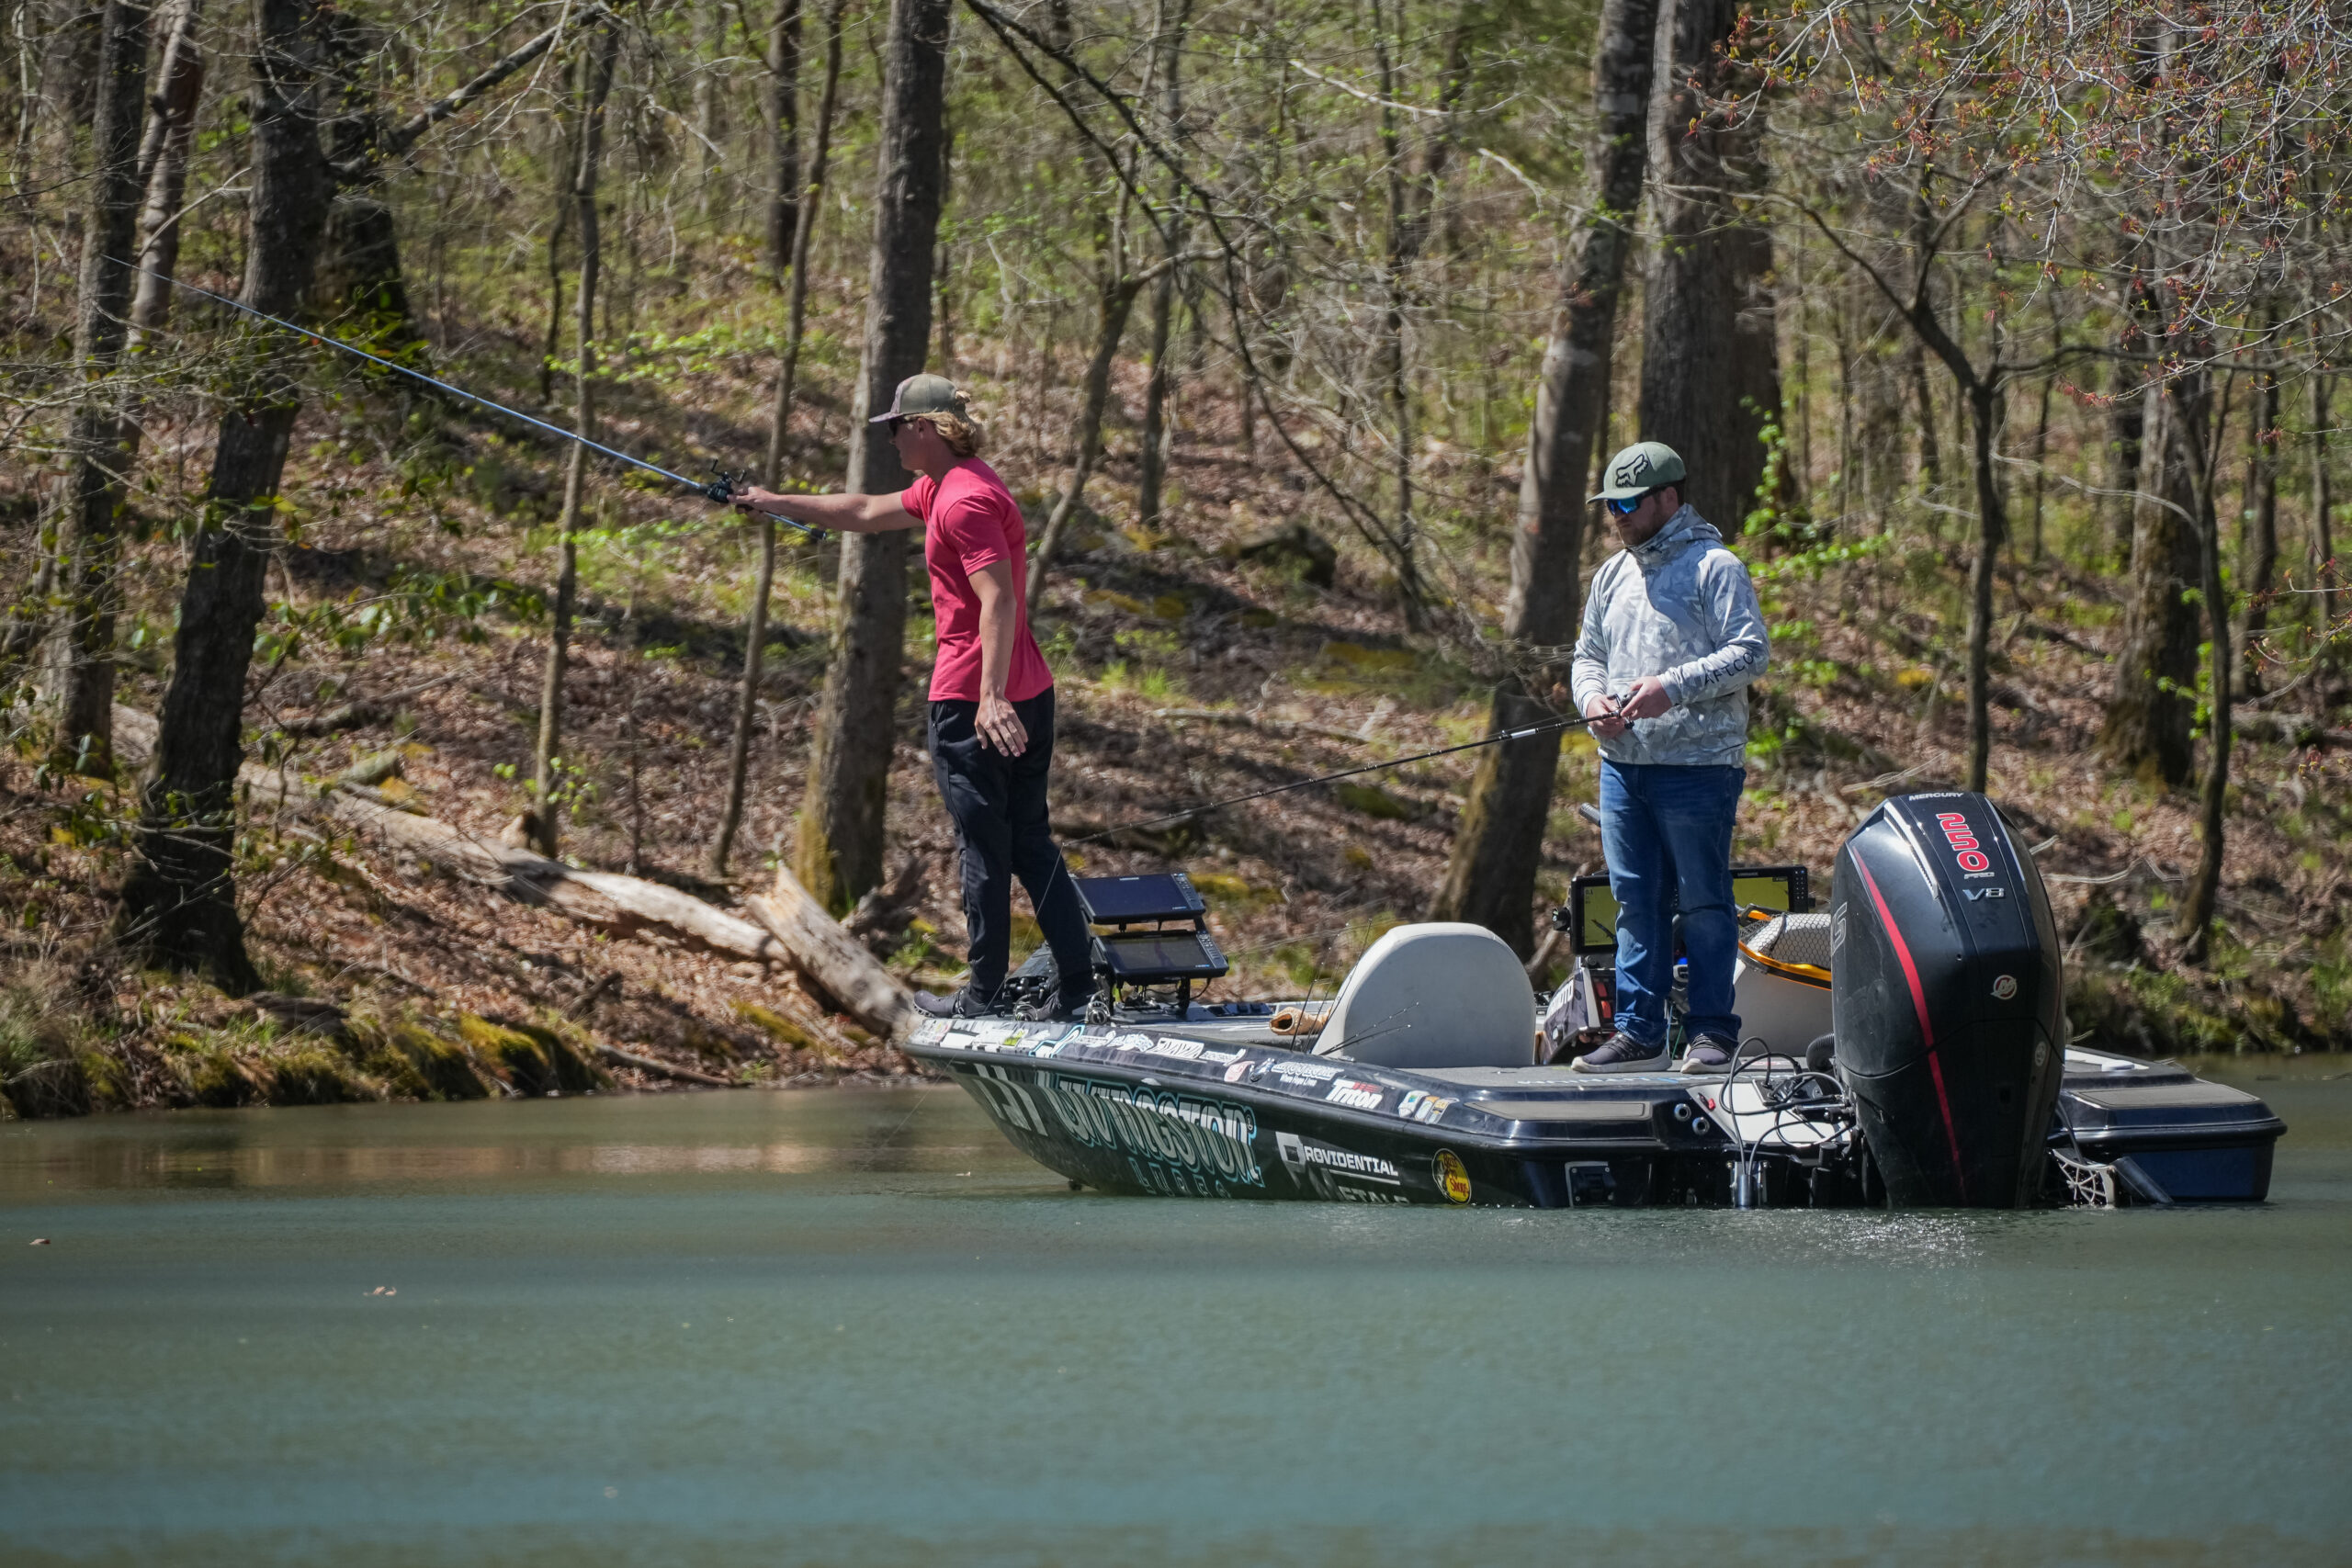 GALLERY: Scenes from the water on Day 1 at Smith Lake - Major League Fishing